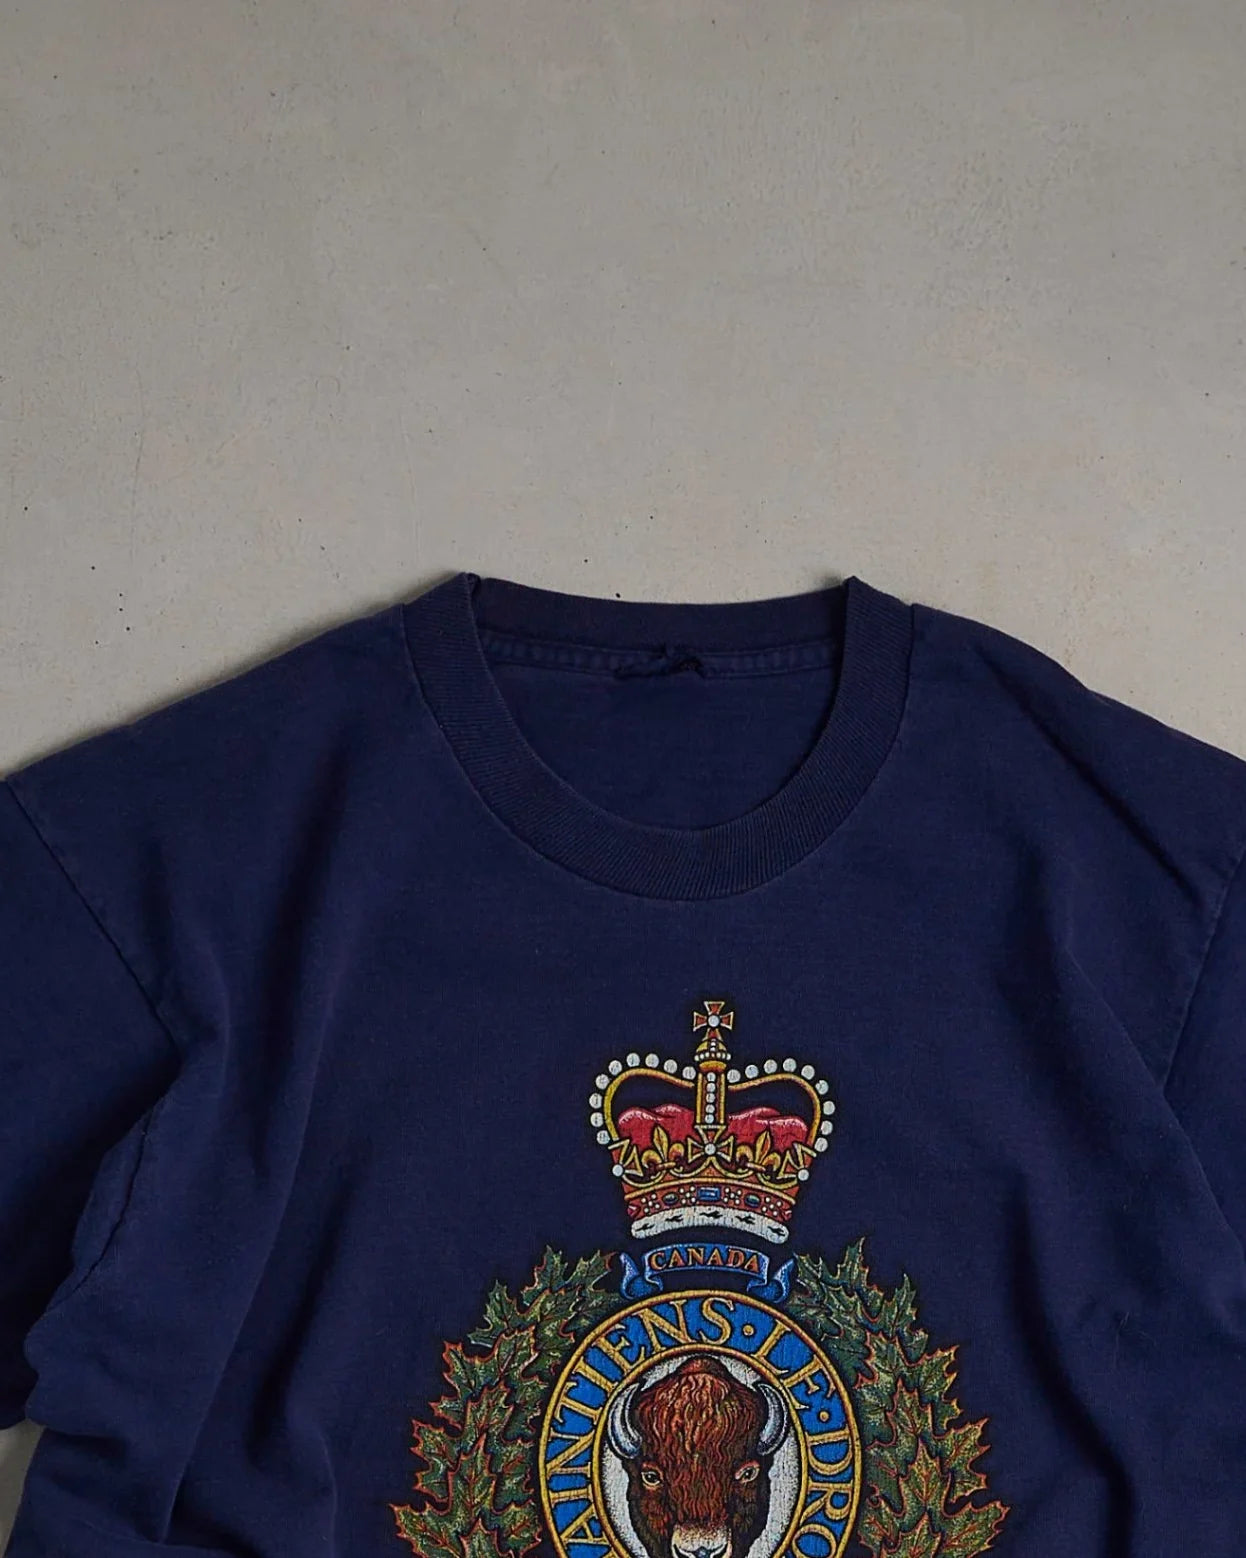 Vintage Royal Canadian Mounted Police Single Stitch T-Shirt Top